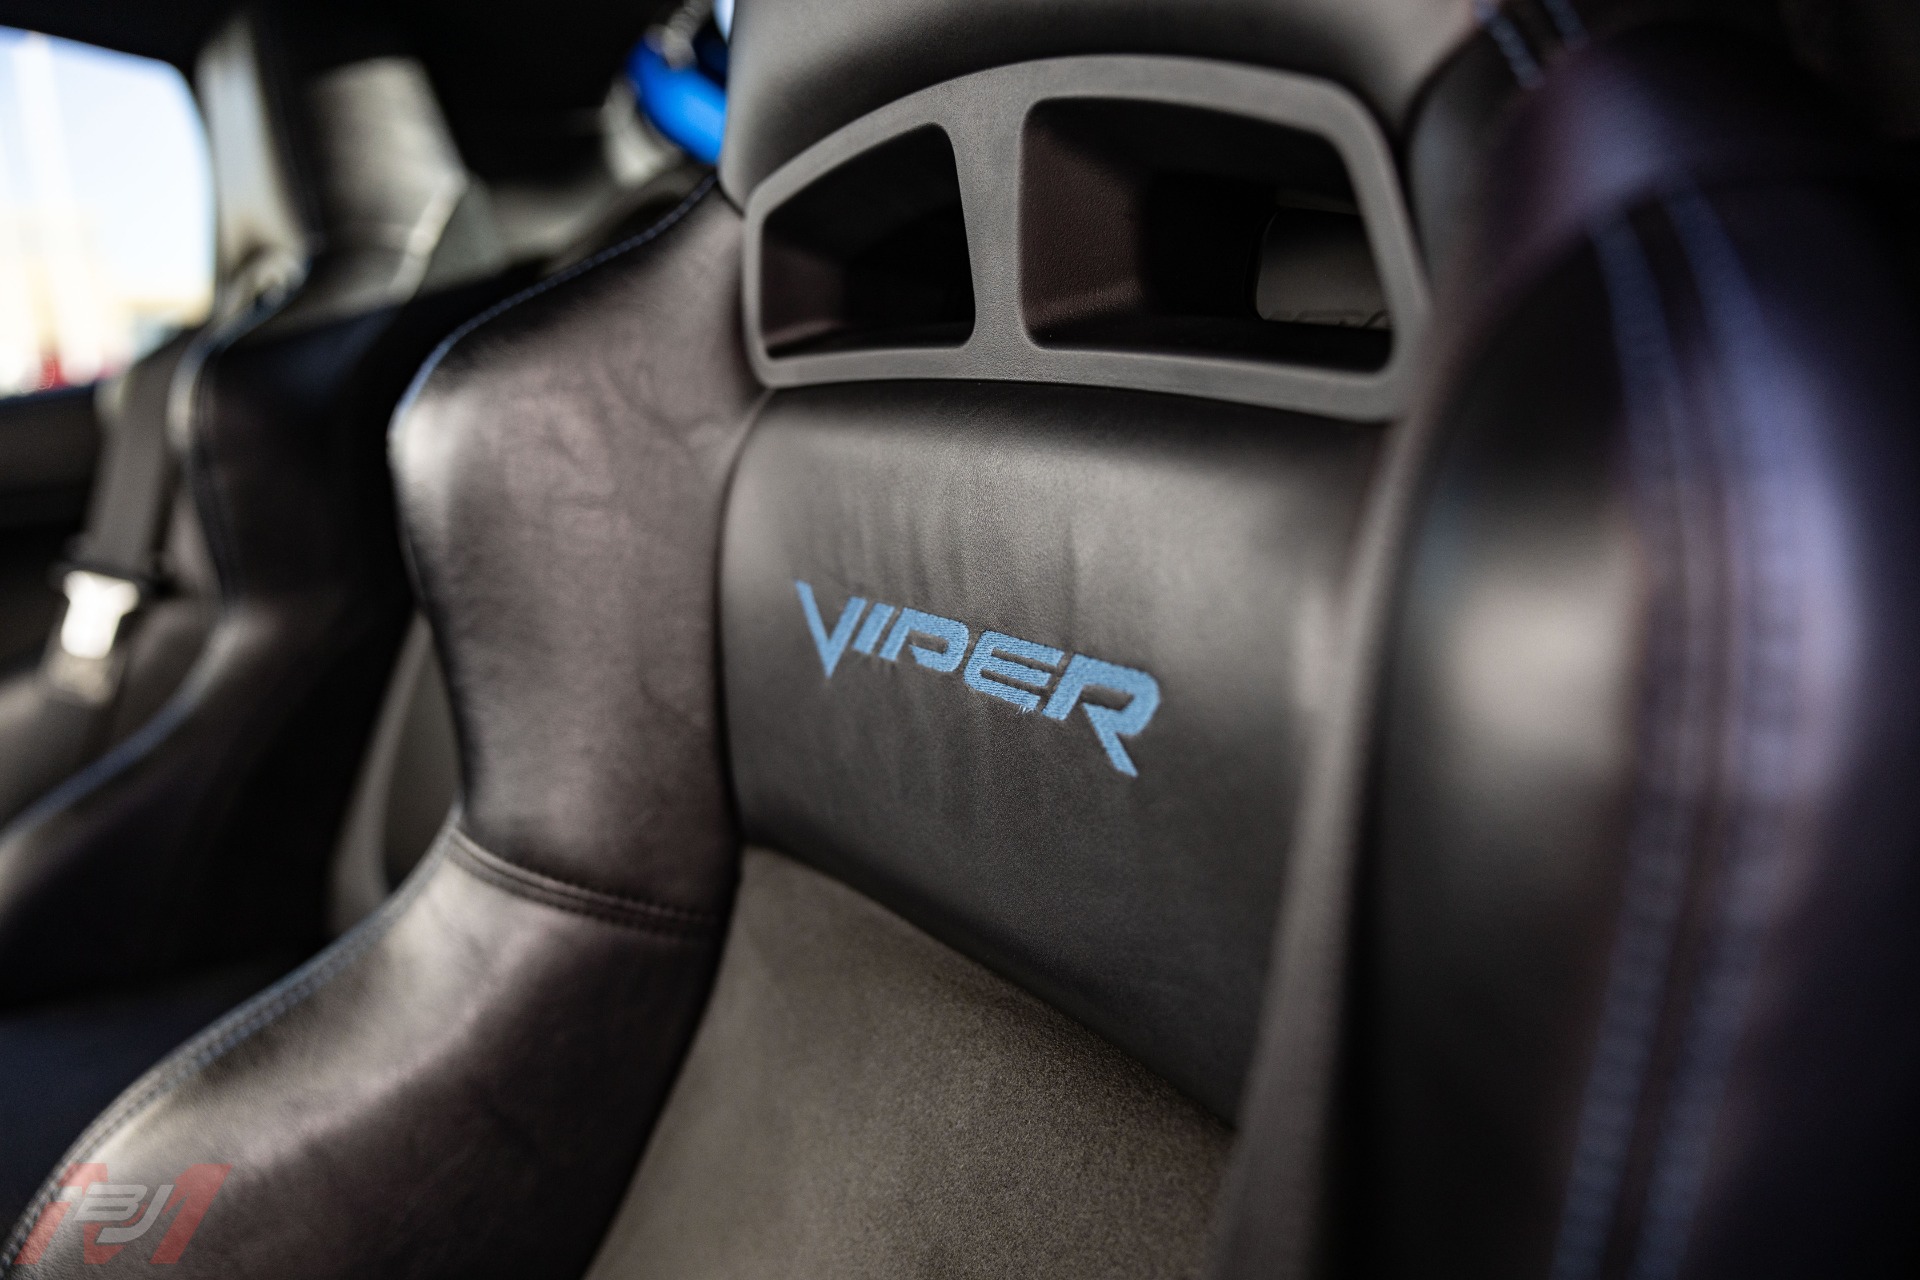 Used-2006-Dodge-Viper-SRT-10-First-Edition-Supercharged